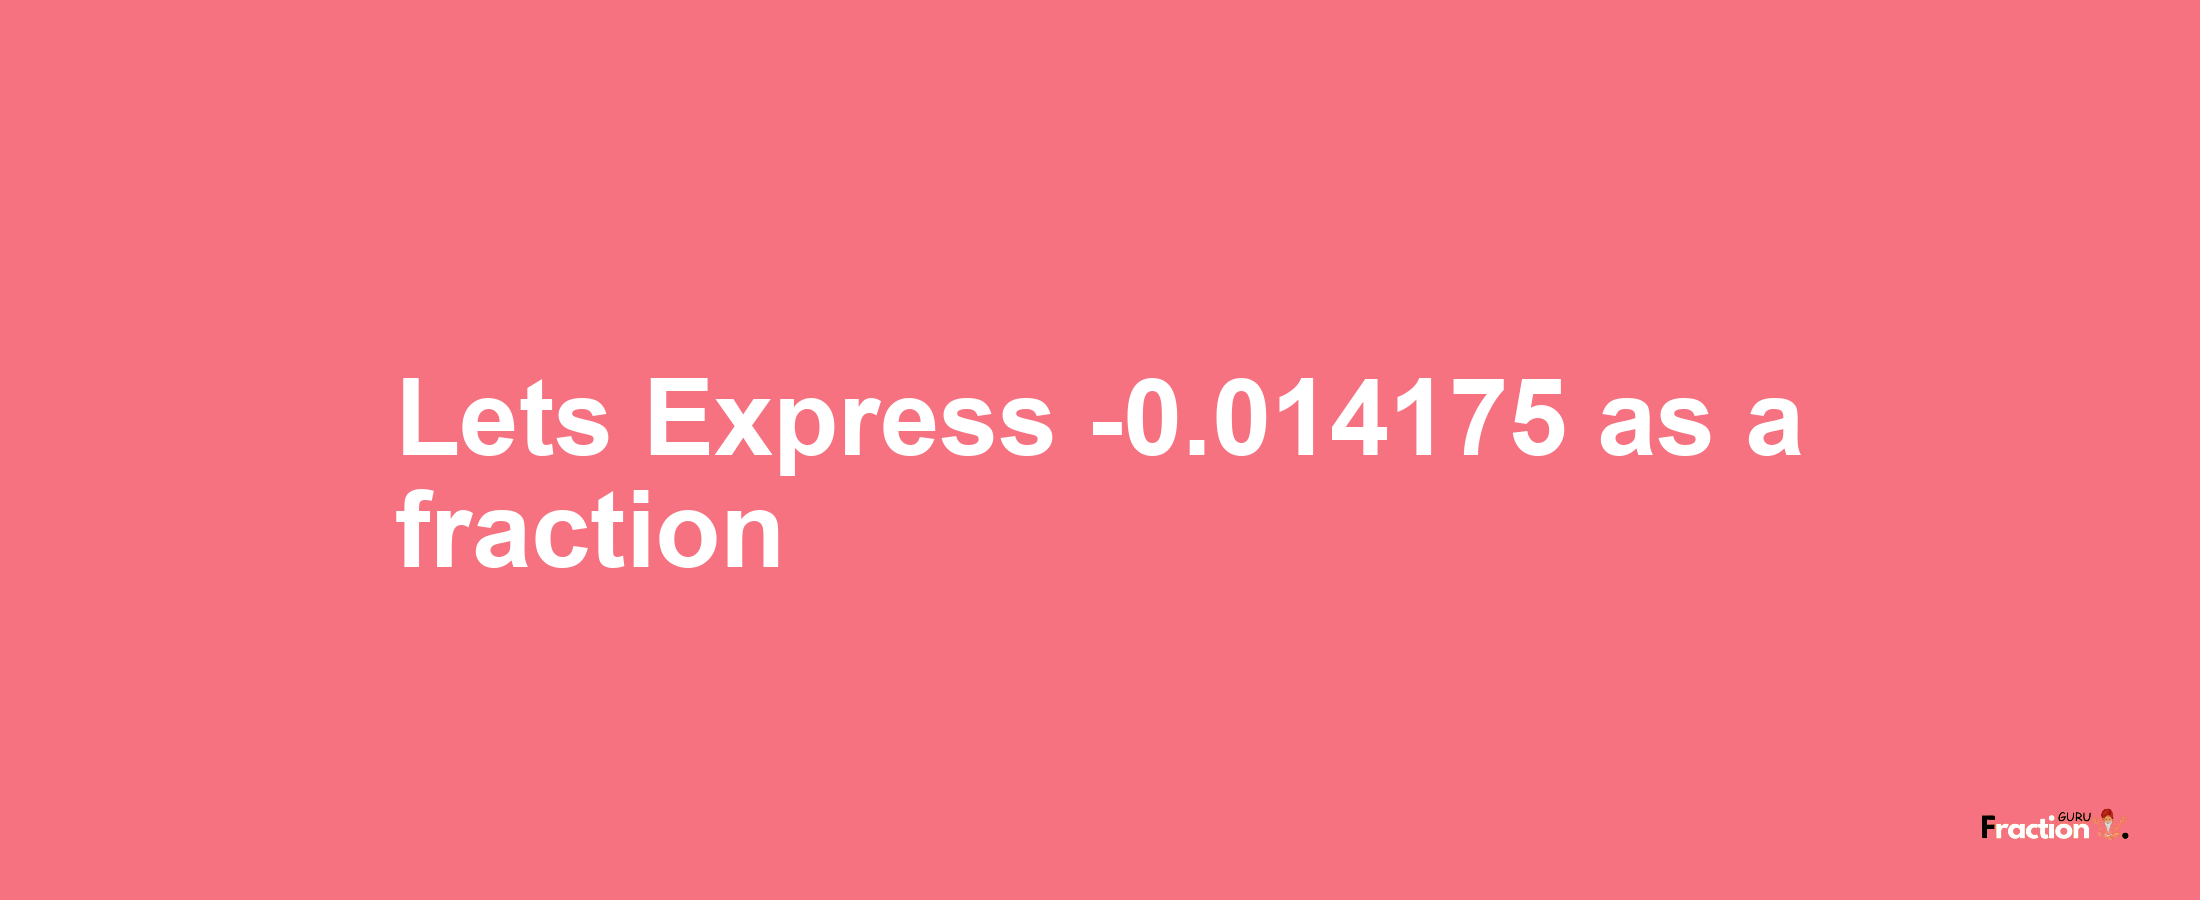 Lets Express -0.014175 as afraction